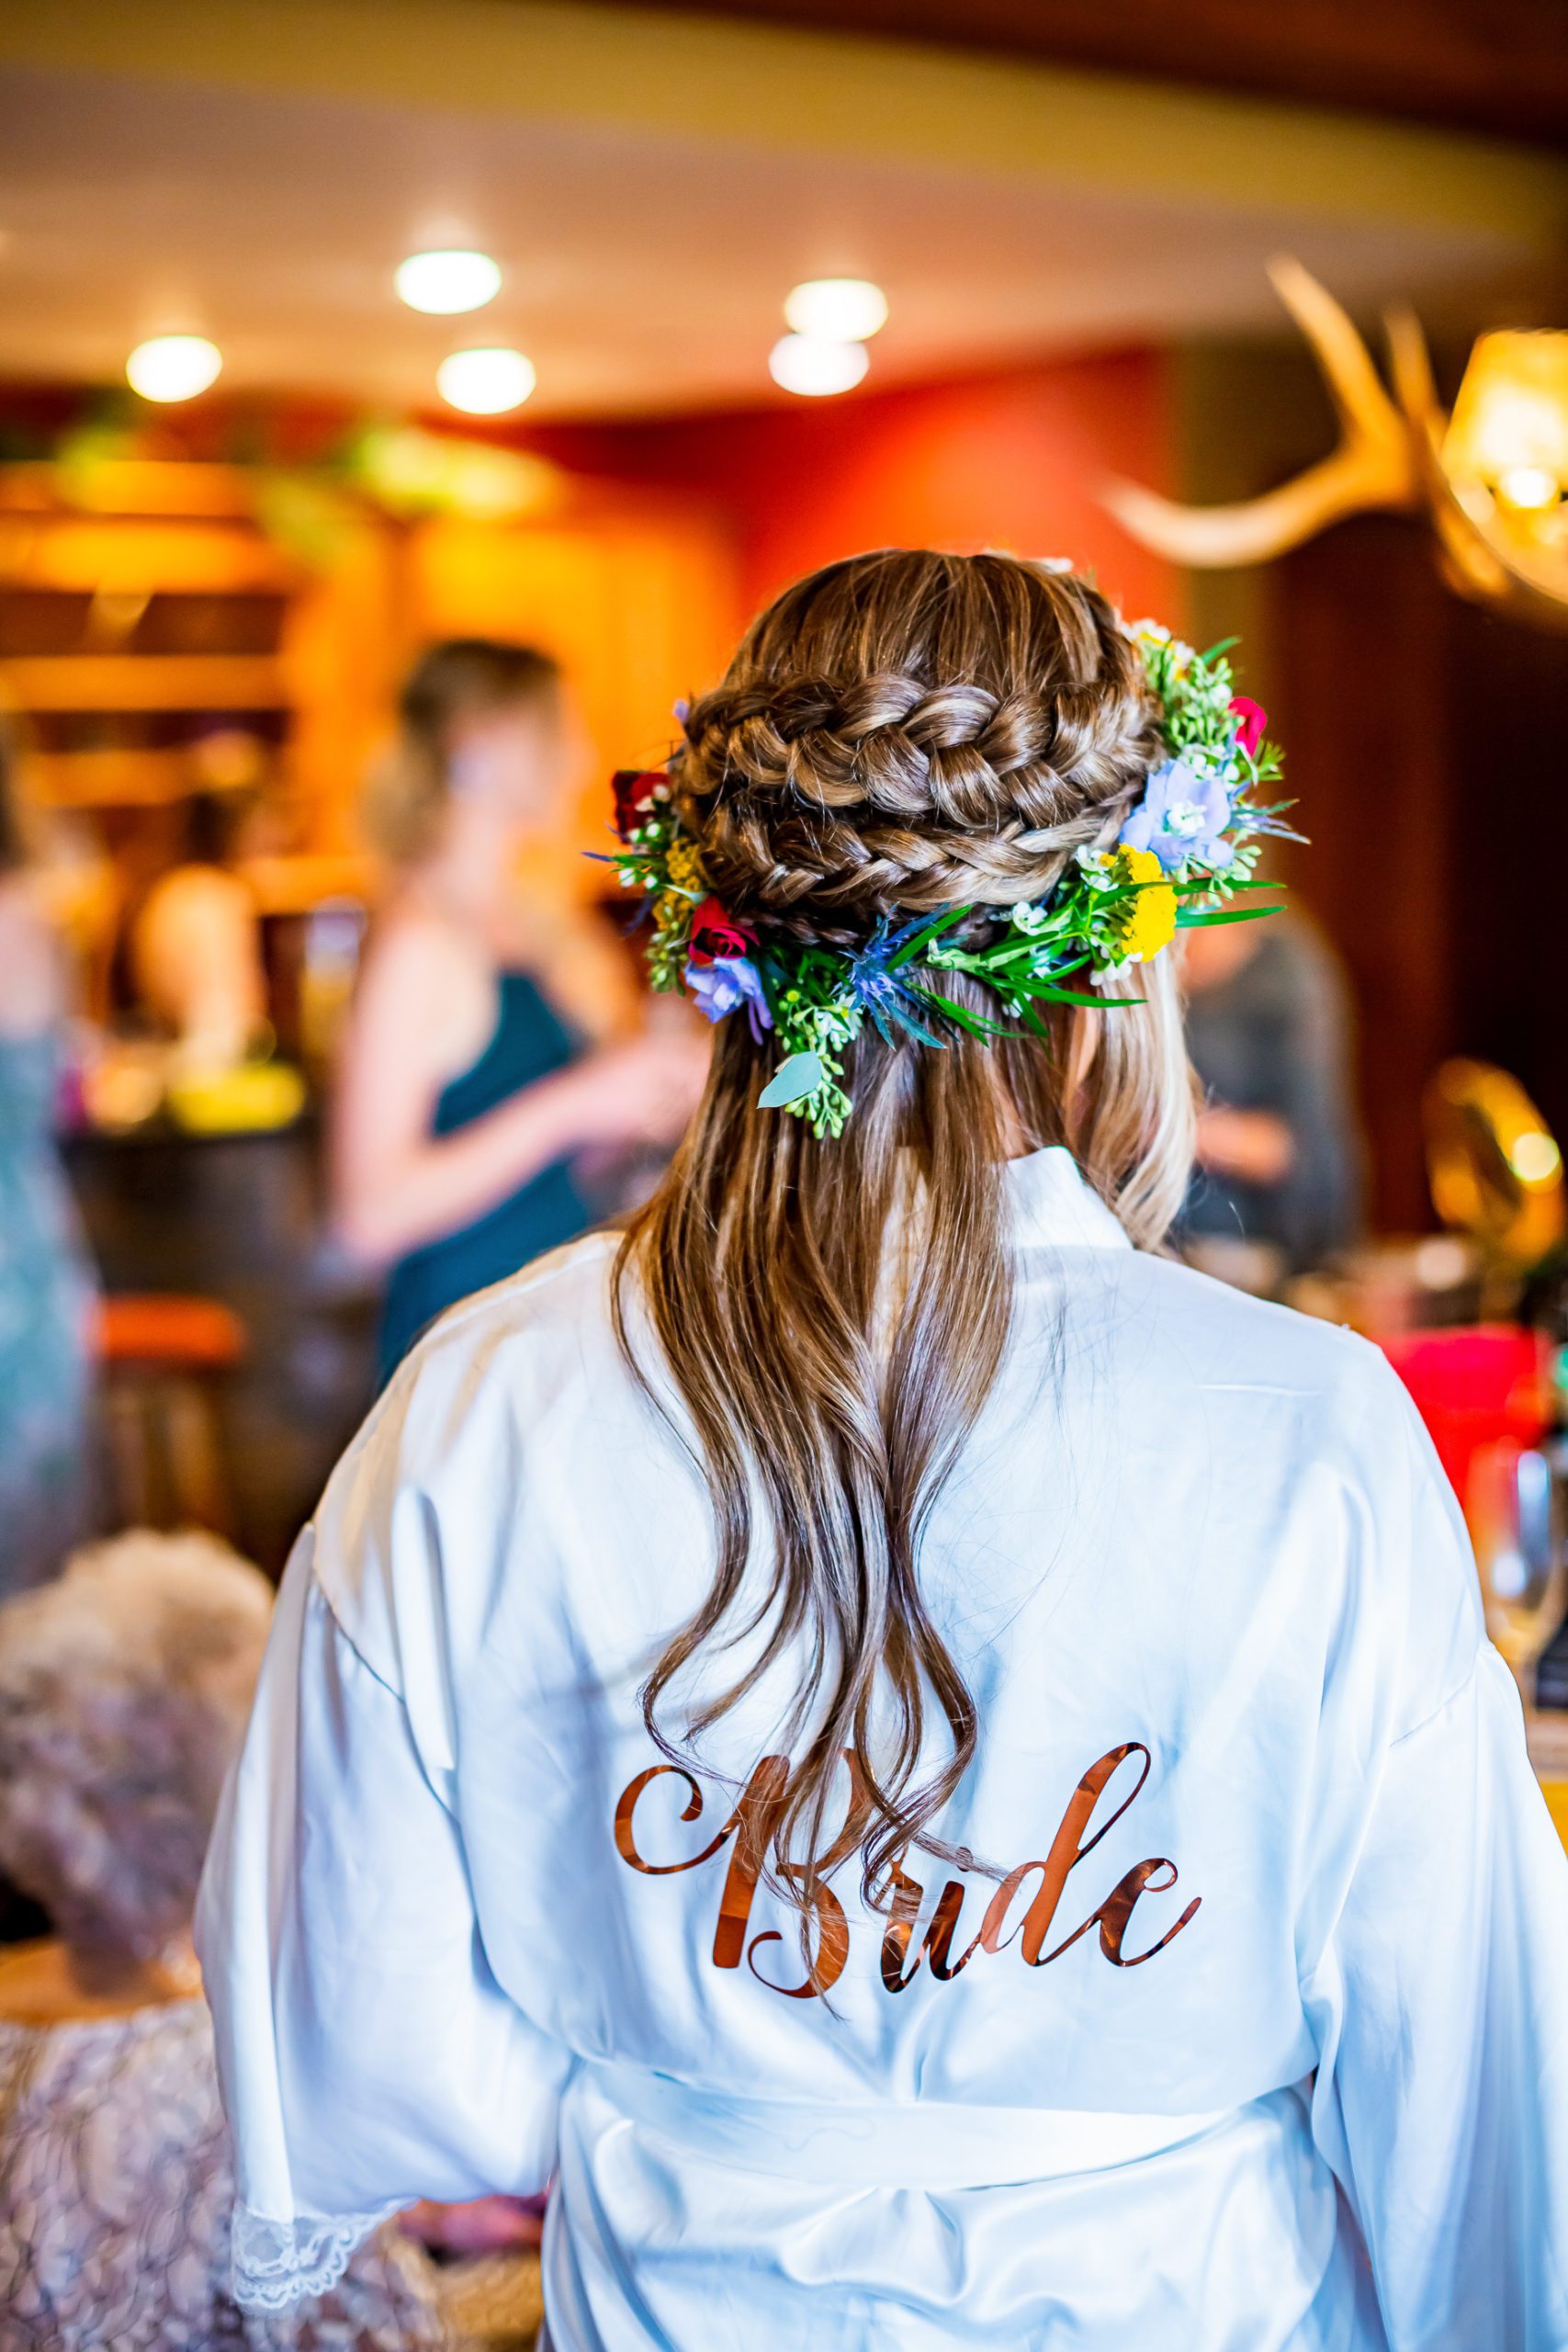 A blonde bride wearing a flower crown and a white robe that says bride on the back.